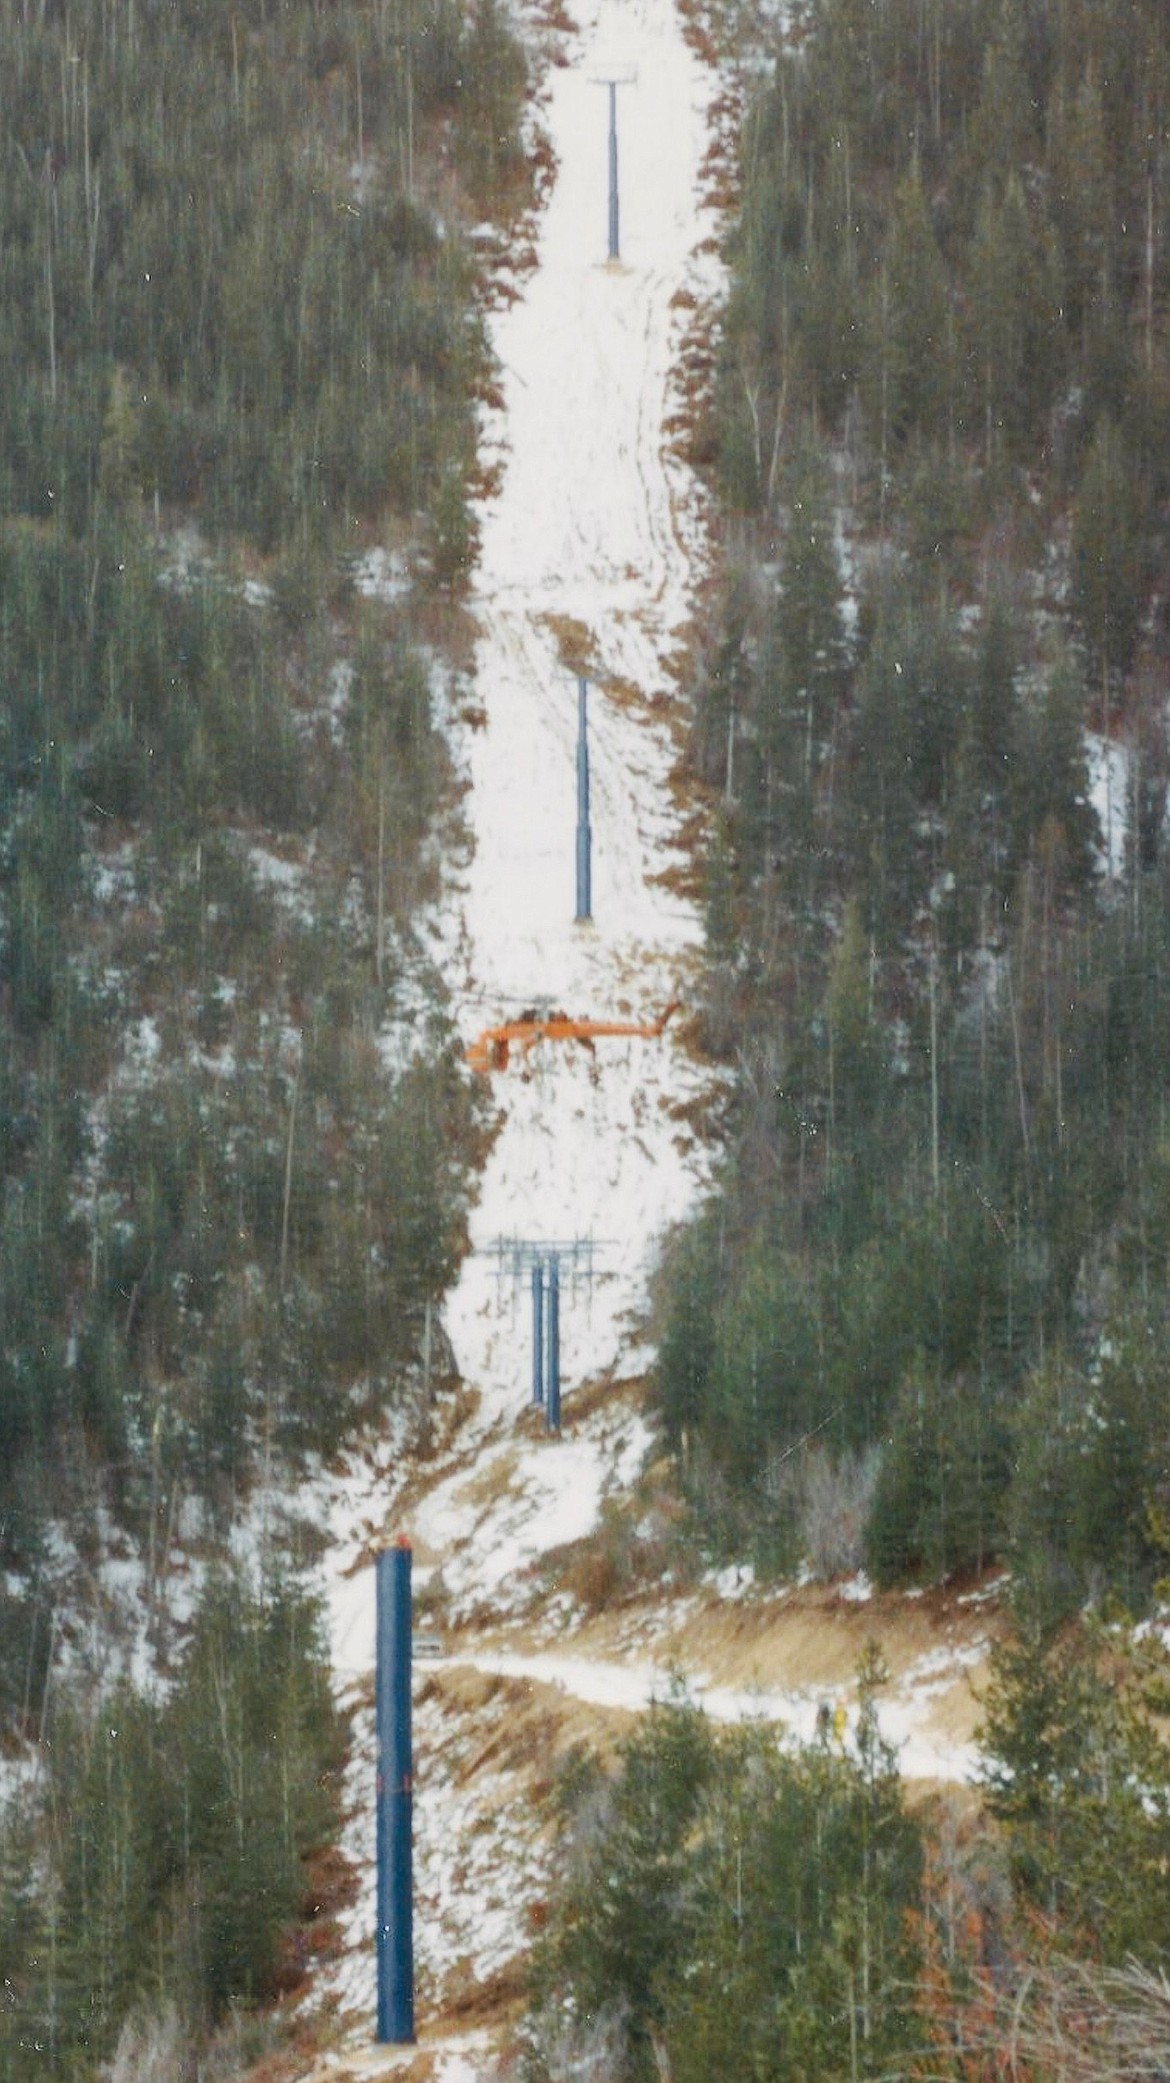 Courtesy photo/ As the path up the hillside was cut, pylons were placed after their concrete form foundations were poured, set, and then moved into place via helicopter.